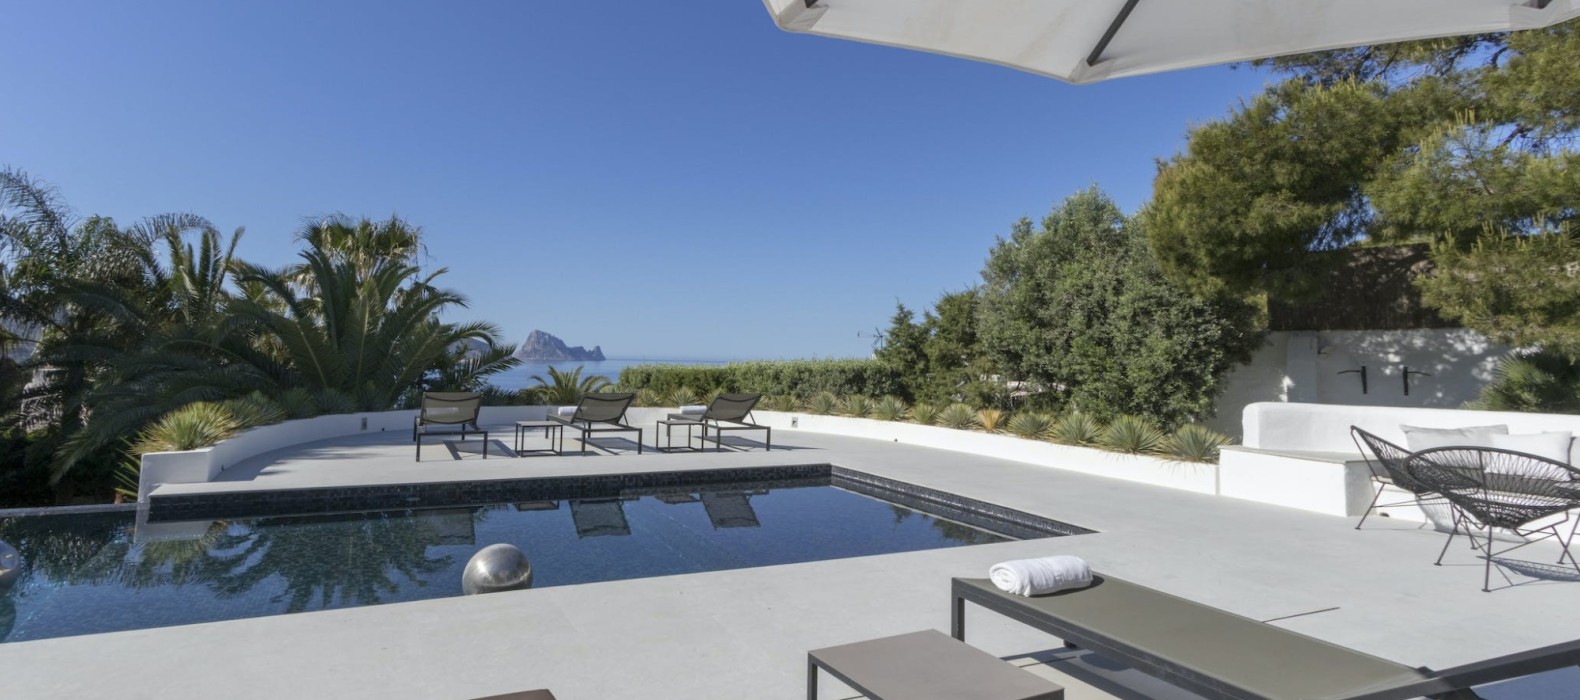 Exterior pool area of Villa The View of Vedra Ibiza